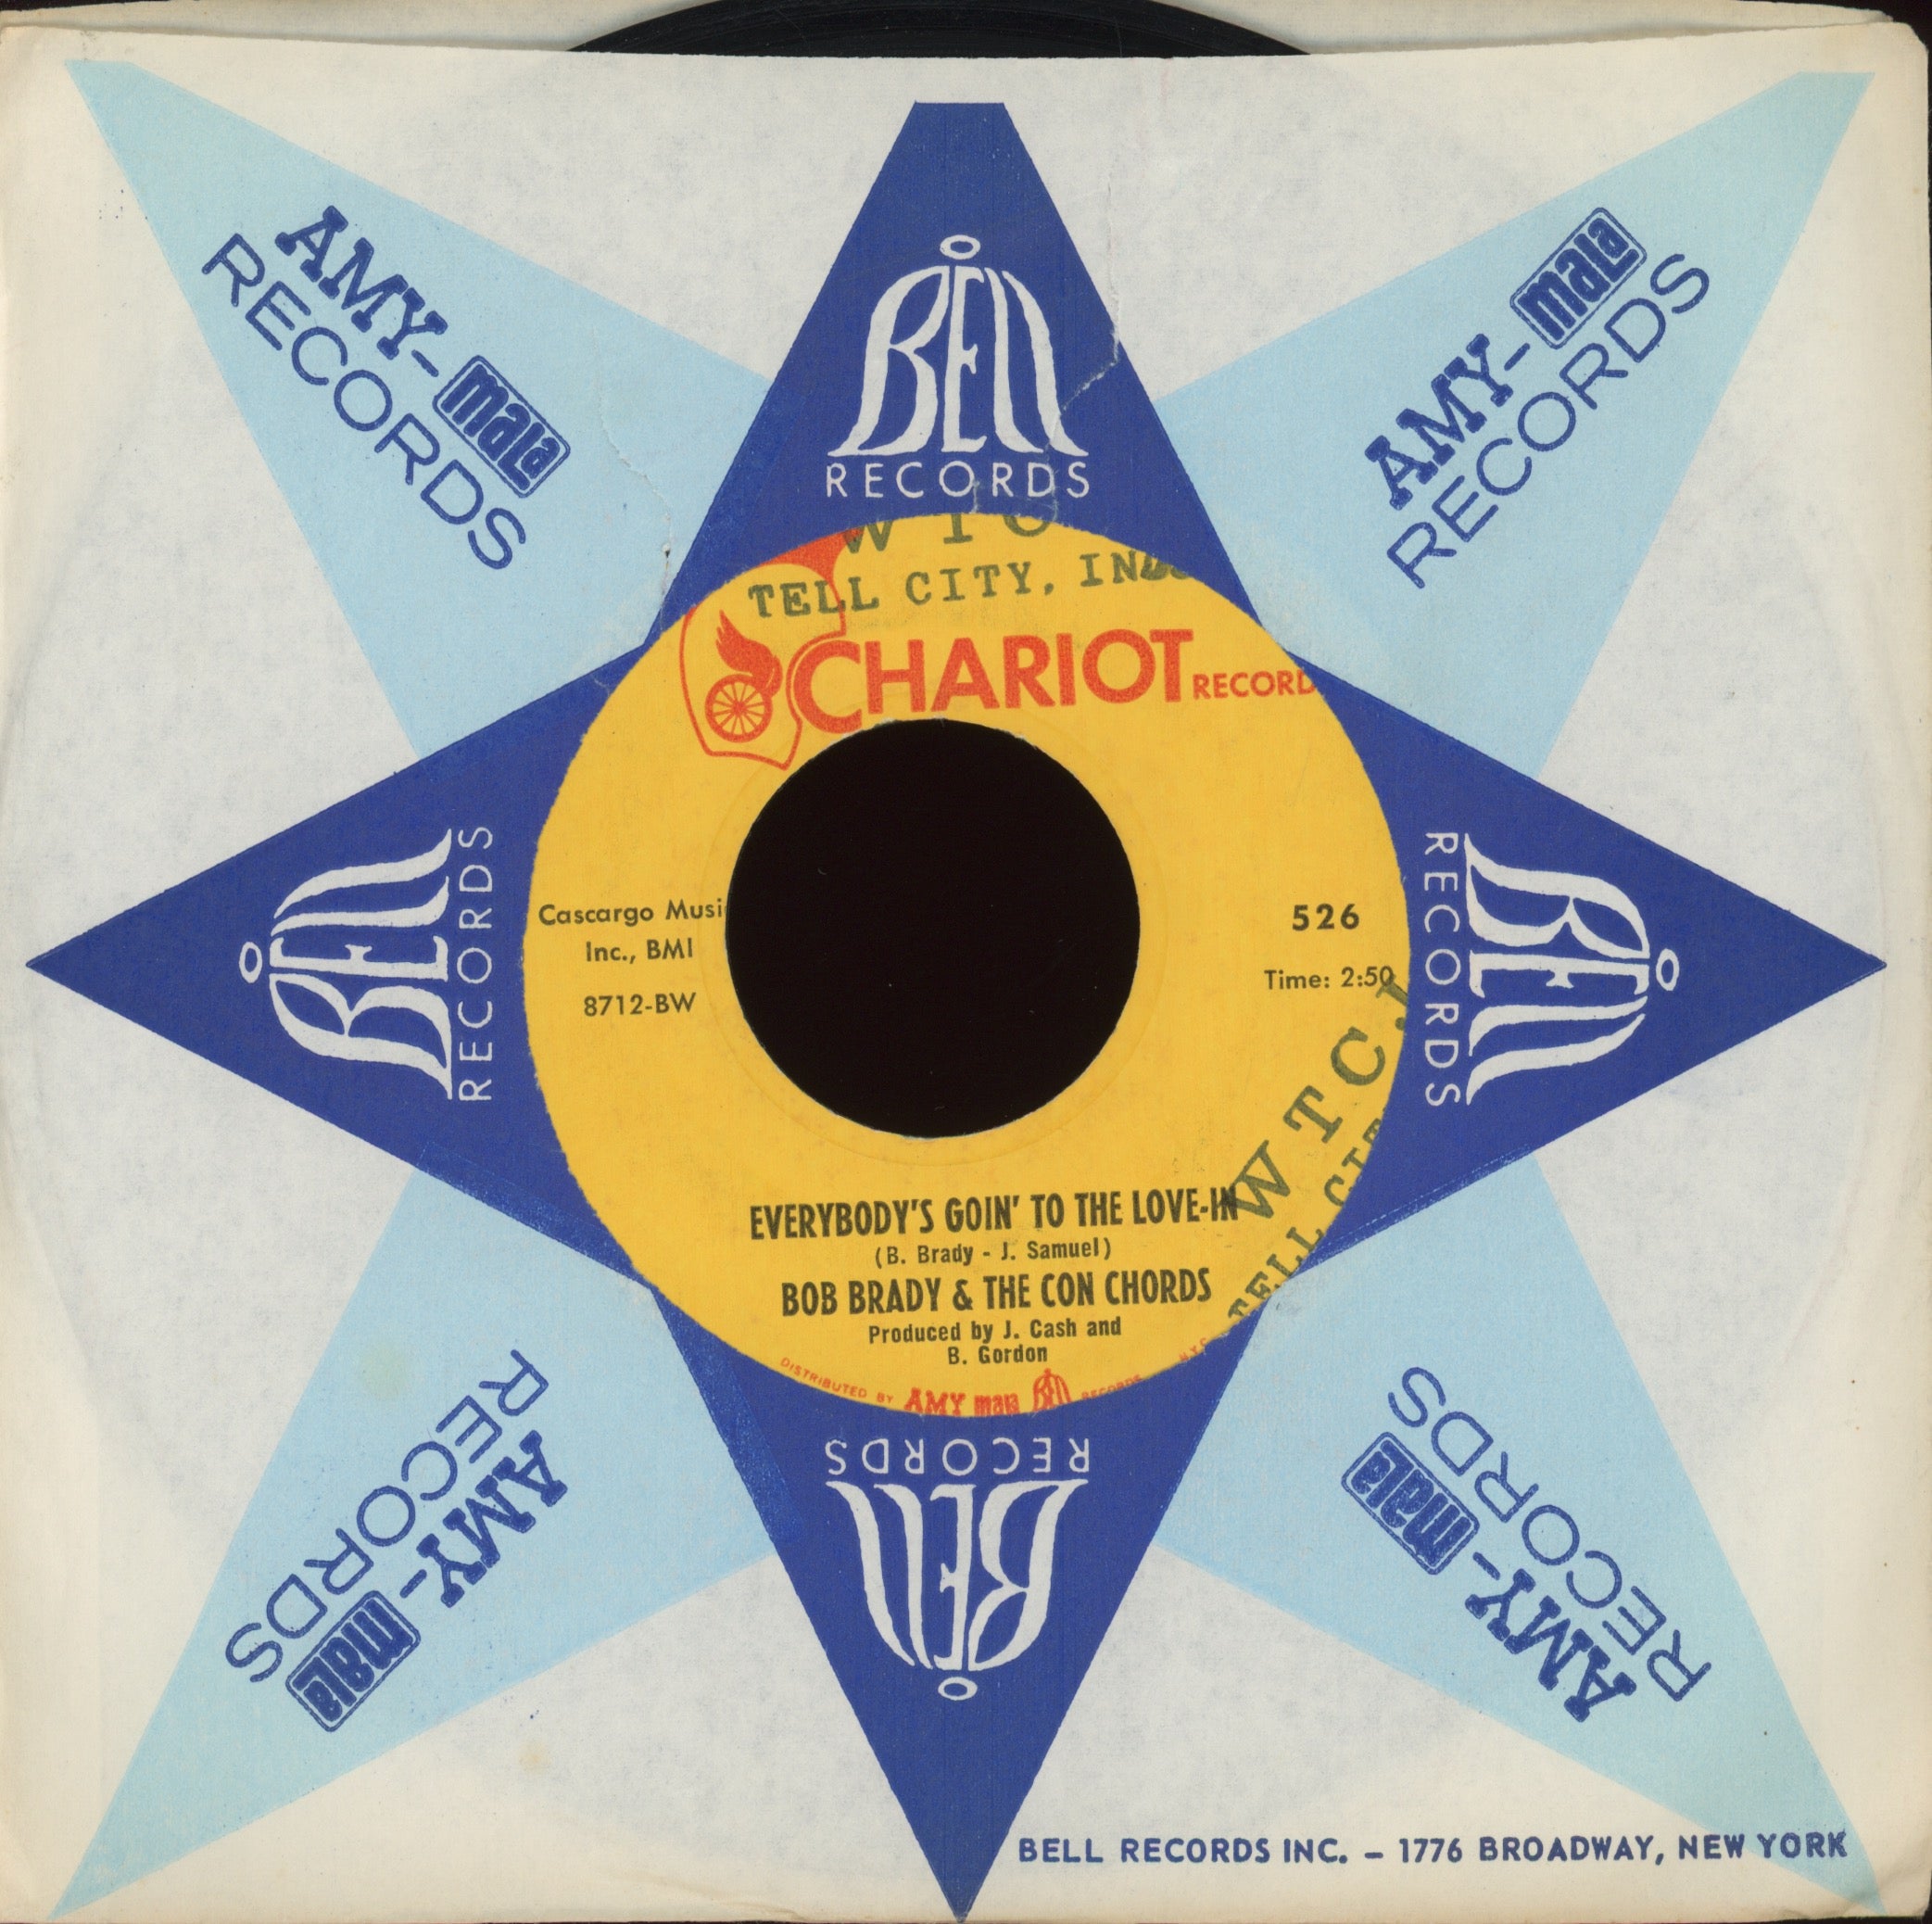 Bob Brady & The Con Chords - Everybody's Goin' To The Love-In on Chariot Northern Soul 45